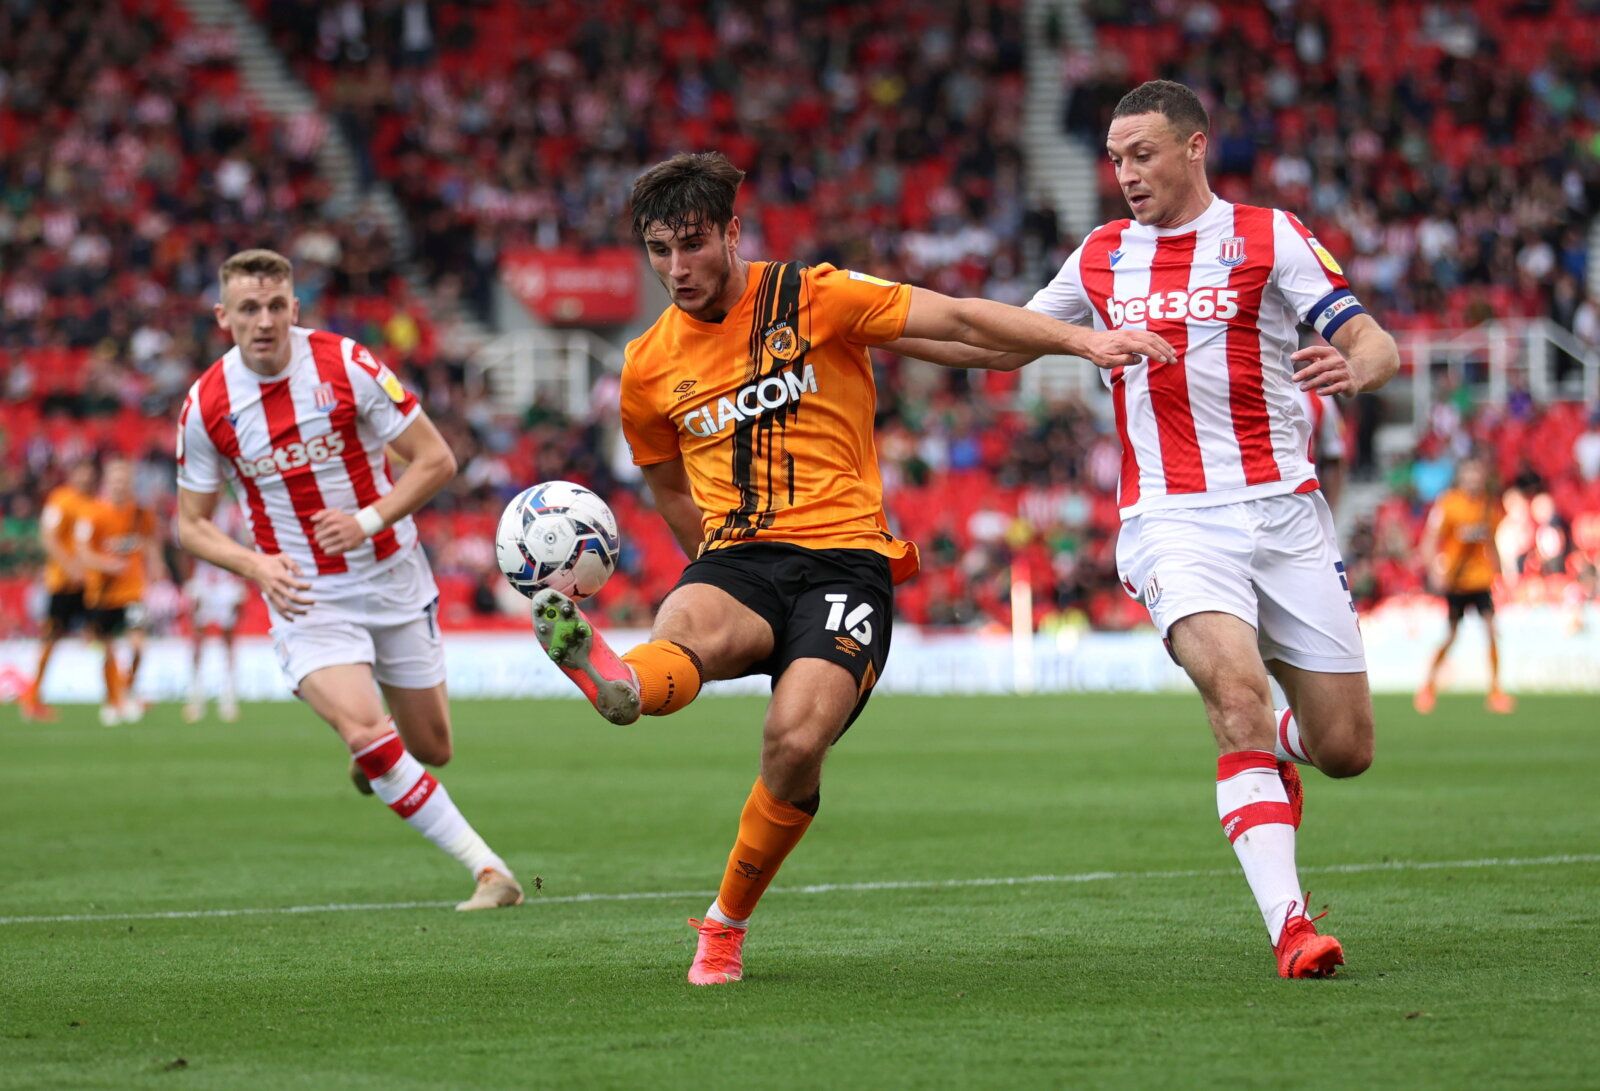 Soccer Football - England - Championship - Stoke City v Hull City - bet365 Stadium, Stoke-on-Trent, Britain - September 25, 2021  Hull City's Ryan Longman in action with Stoke City's James Chester  Action Images/John Clifton   EDITORIAL USE ONLY. No use with unauthorized audio, video, data, fixture lists, club/league logos or 